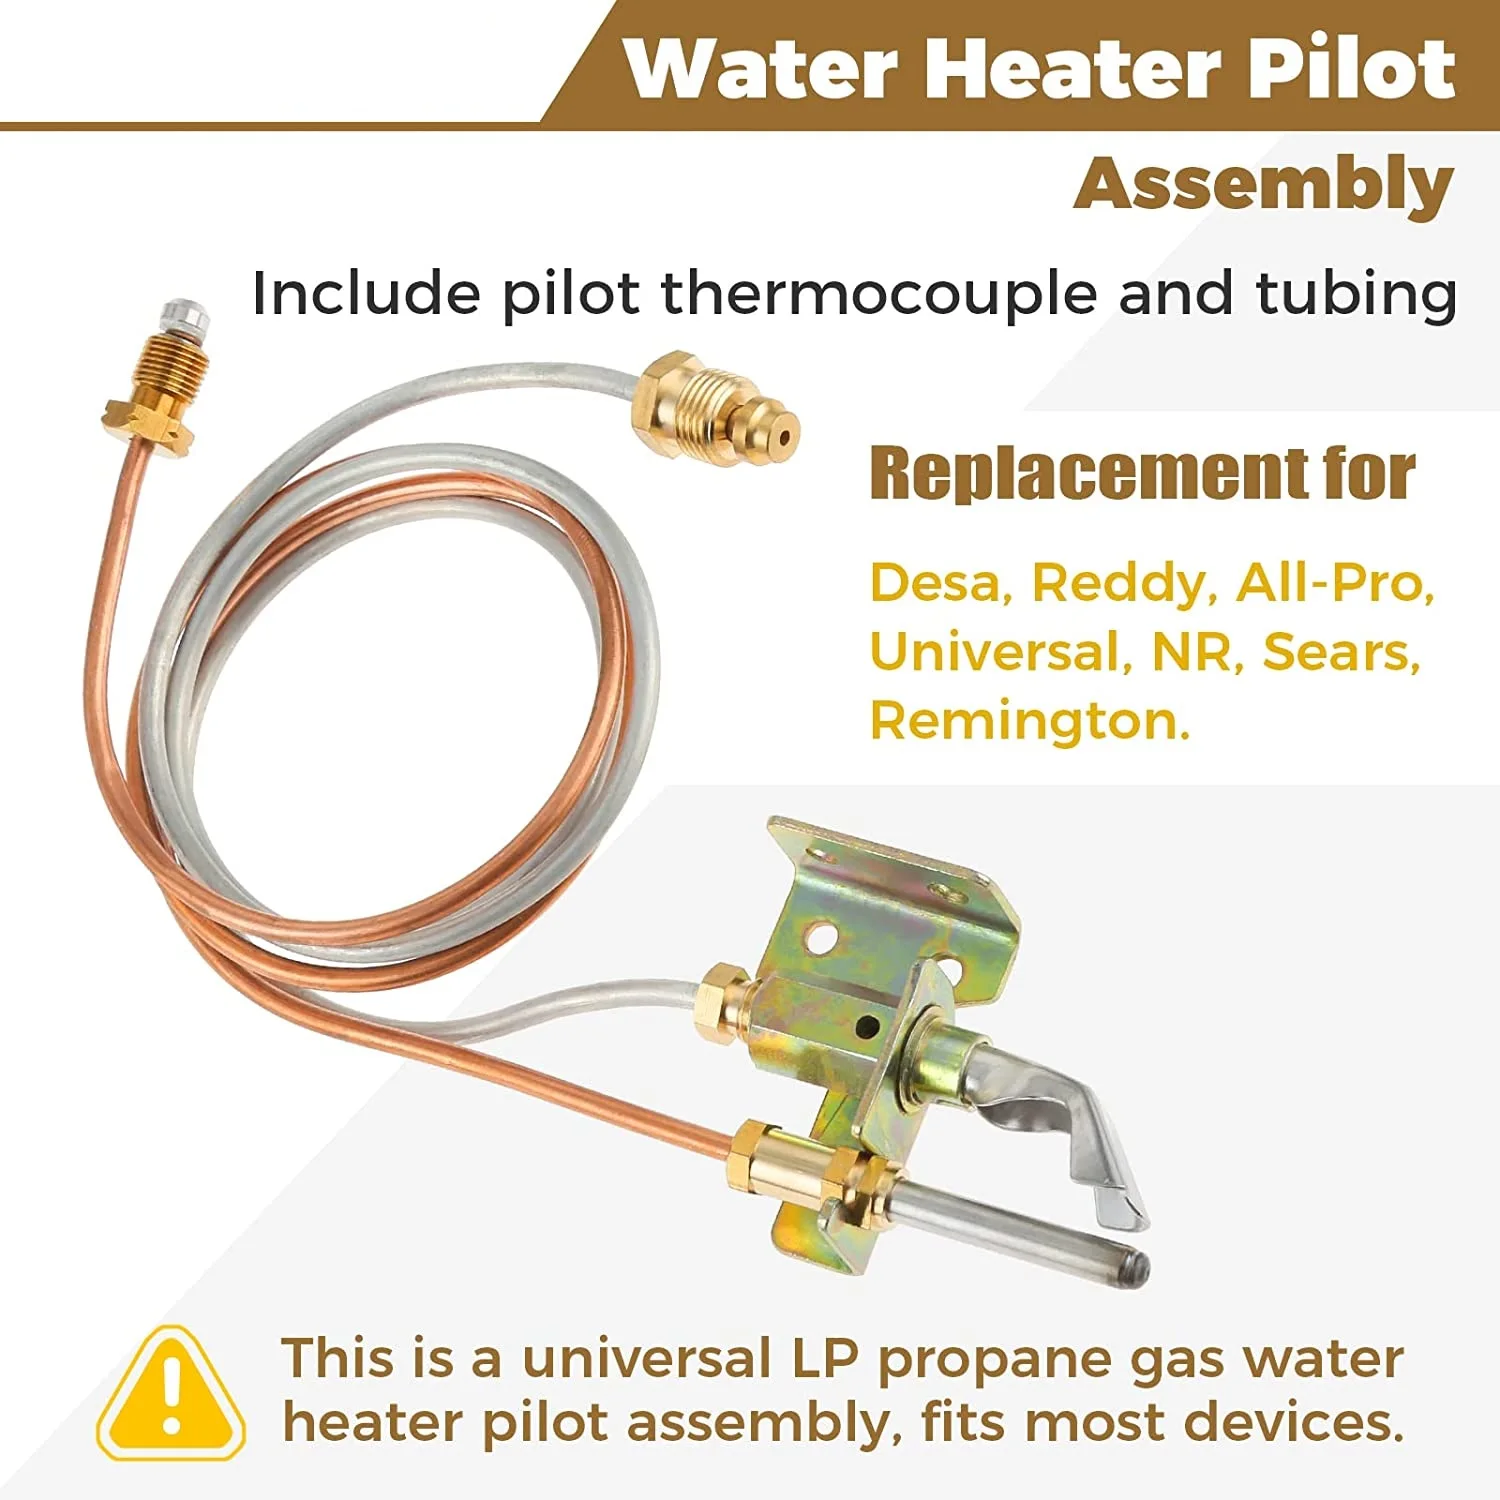 LP Propane Gas Ignition Pilot Assembly with Pilot Thermocouple 22in Tubing  Water Heater Replacement for Desa Reddy All-Pro NR - AliExpress